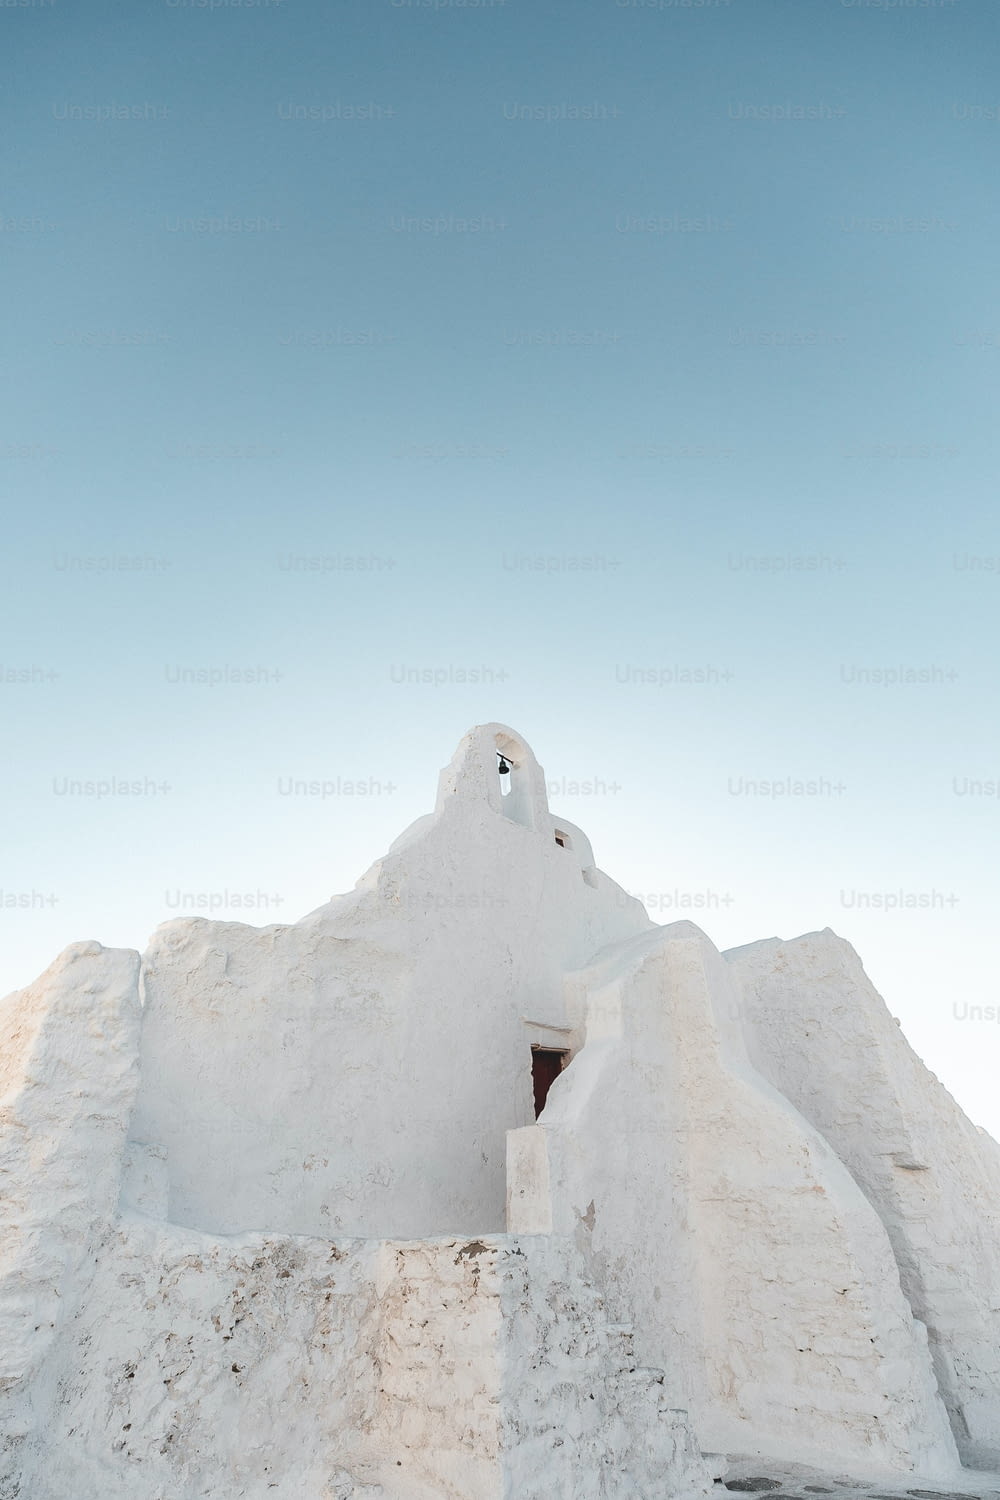 A low angle shot of a Paraportiani Orthodox Church, Mykonos